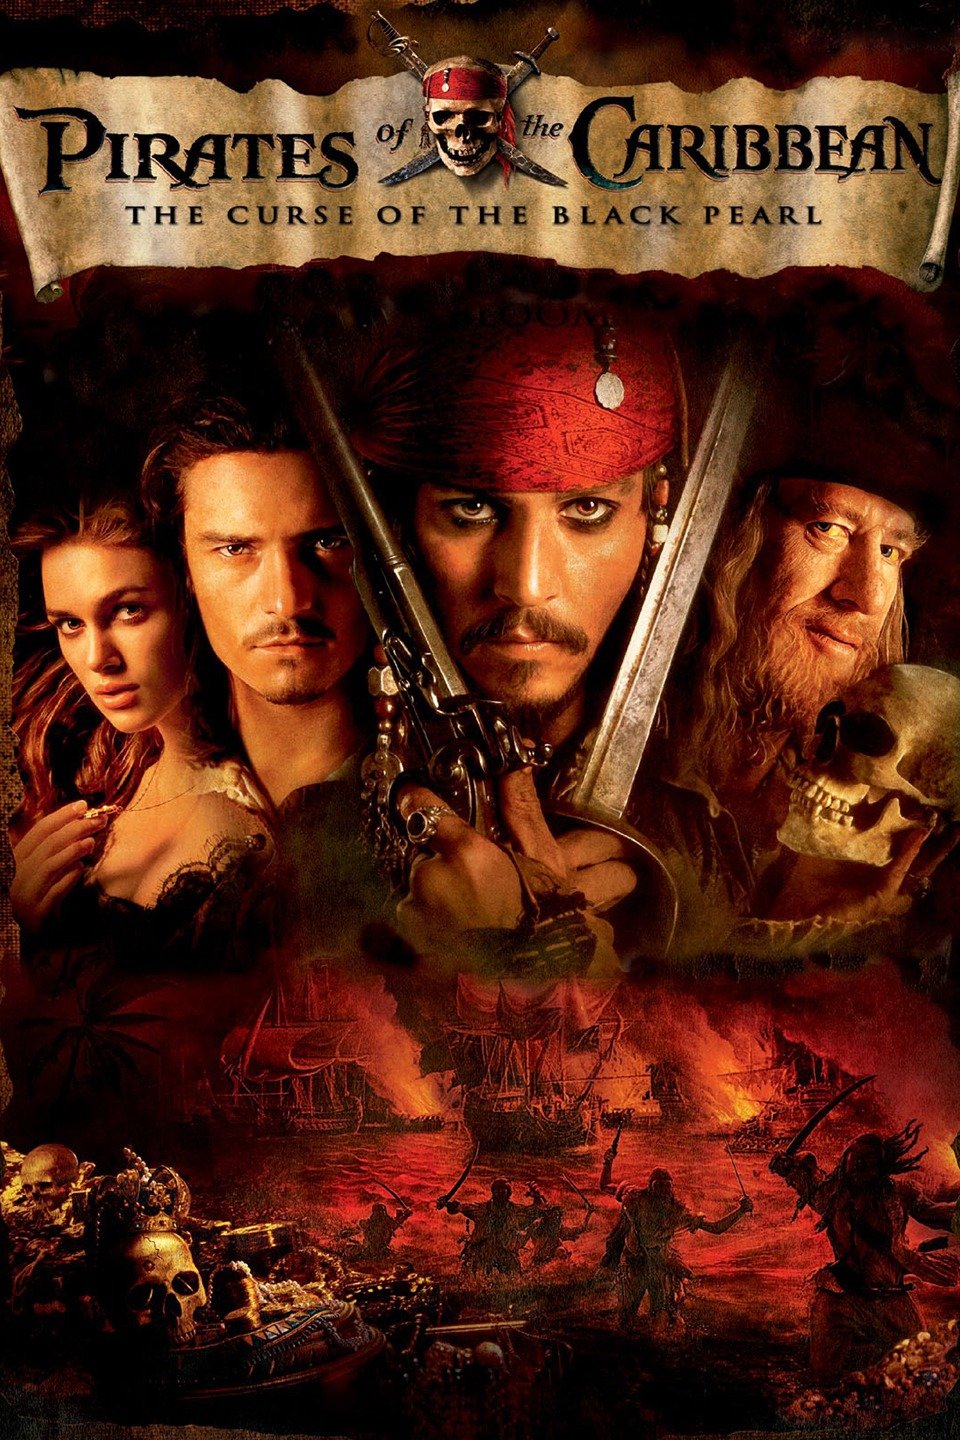 pirates of the caribbean 1 full movie tamil dubbed download